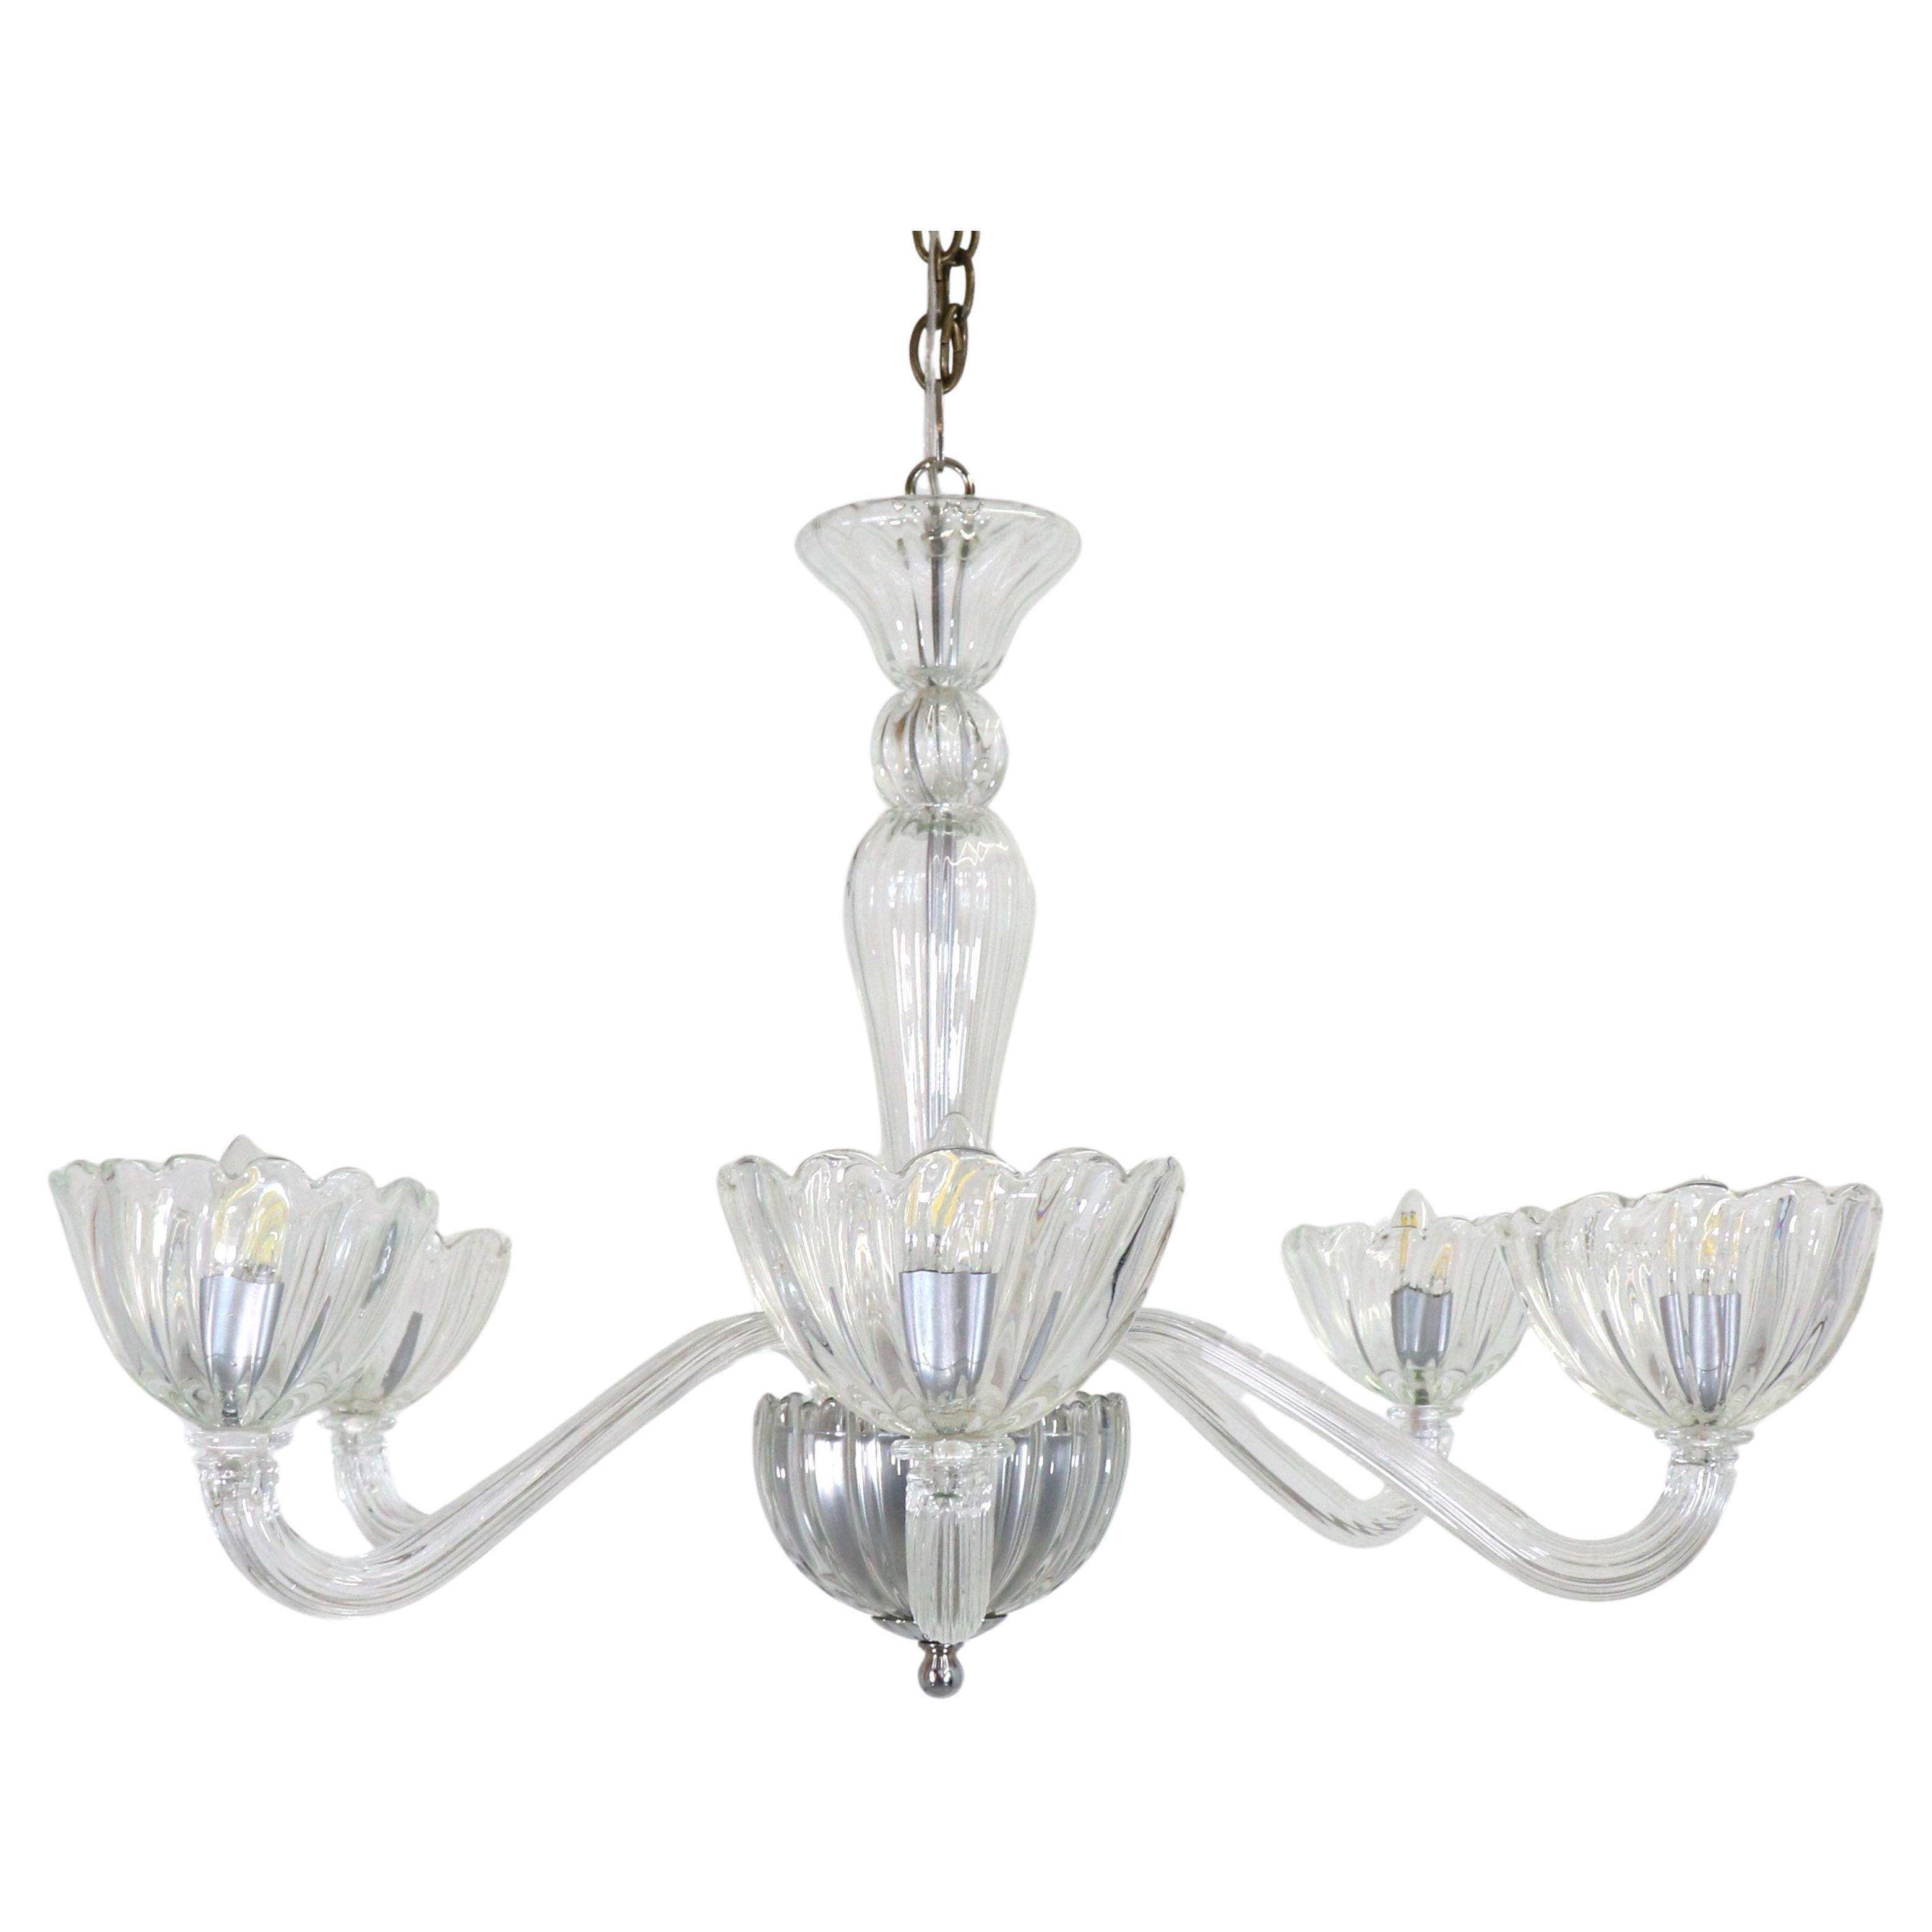  Mid-Century Ribbed Murano Glass Chandelier with Six Scalloped Edges Bobeches